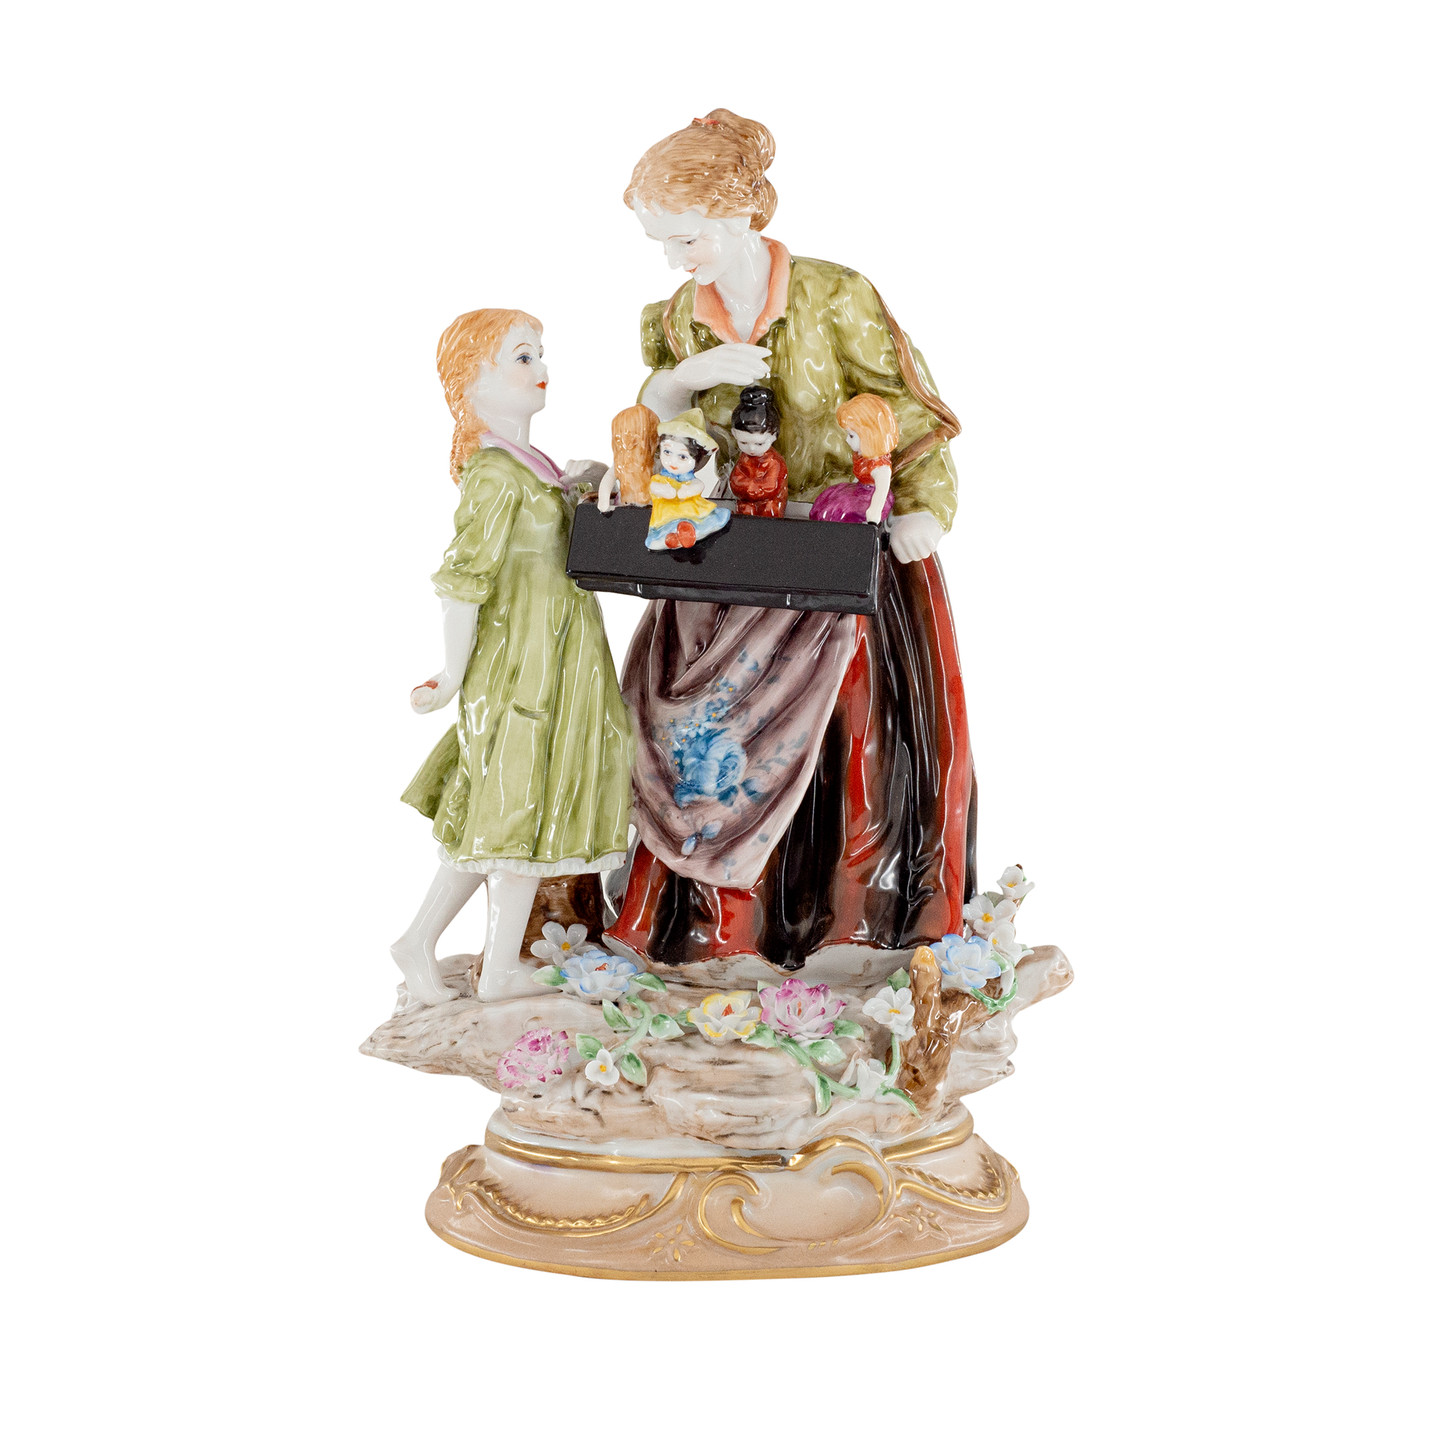 Lady Puppeteer and Child Porcelain Figurine